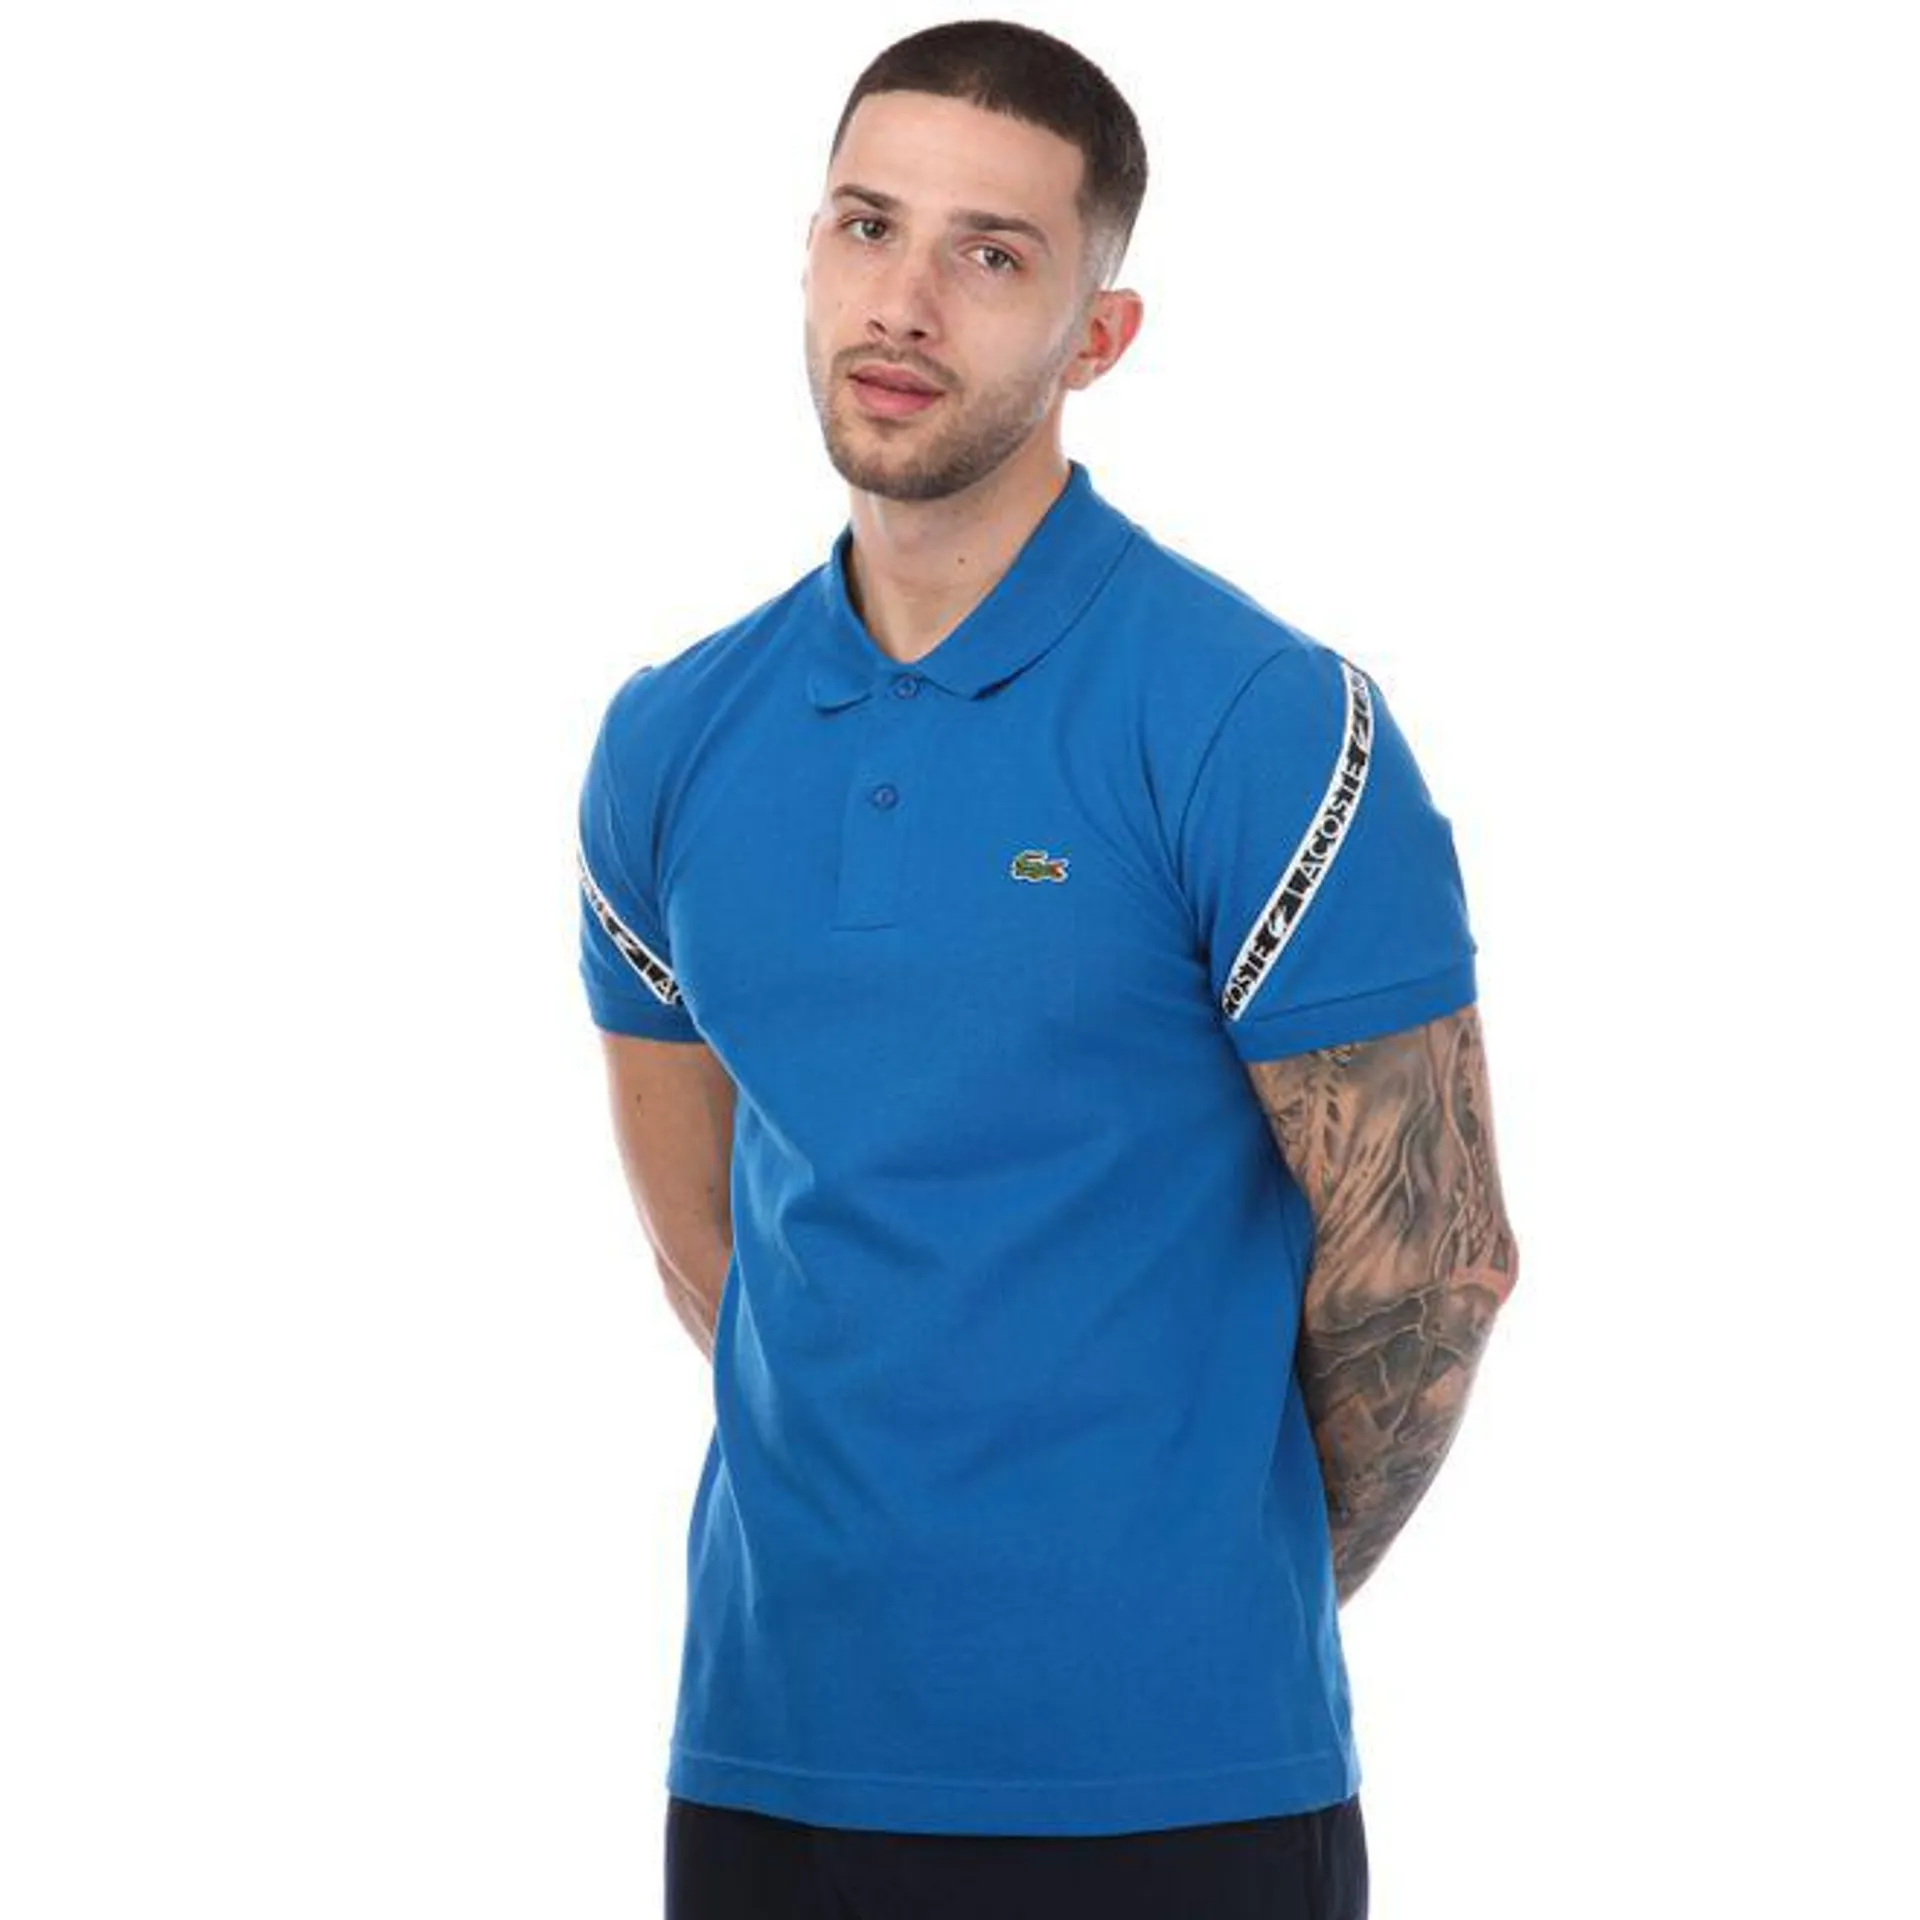 Lacoste Mens Regular Fit Stretch Pique Polo Shirt in Blue